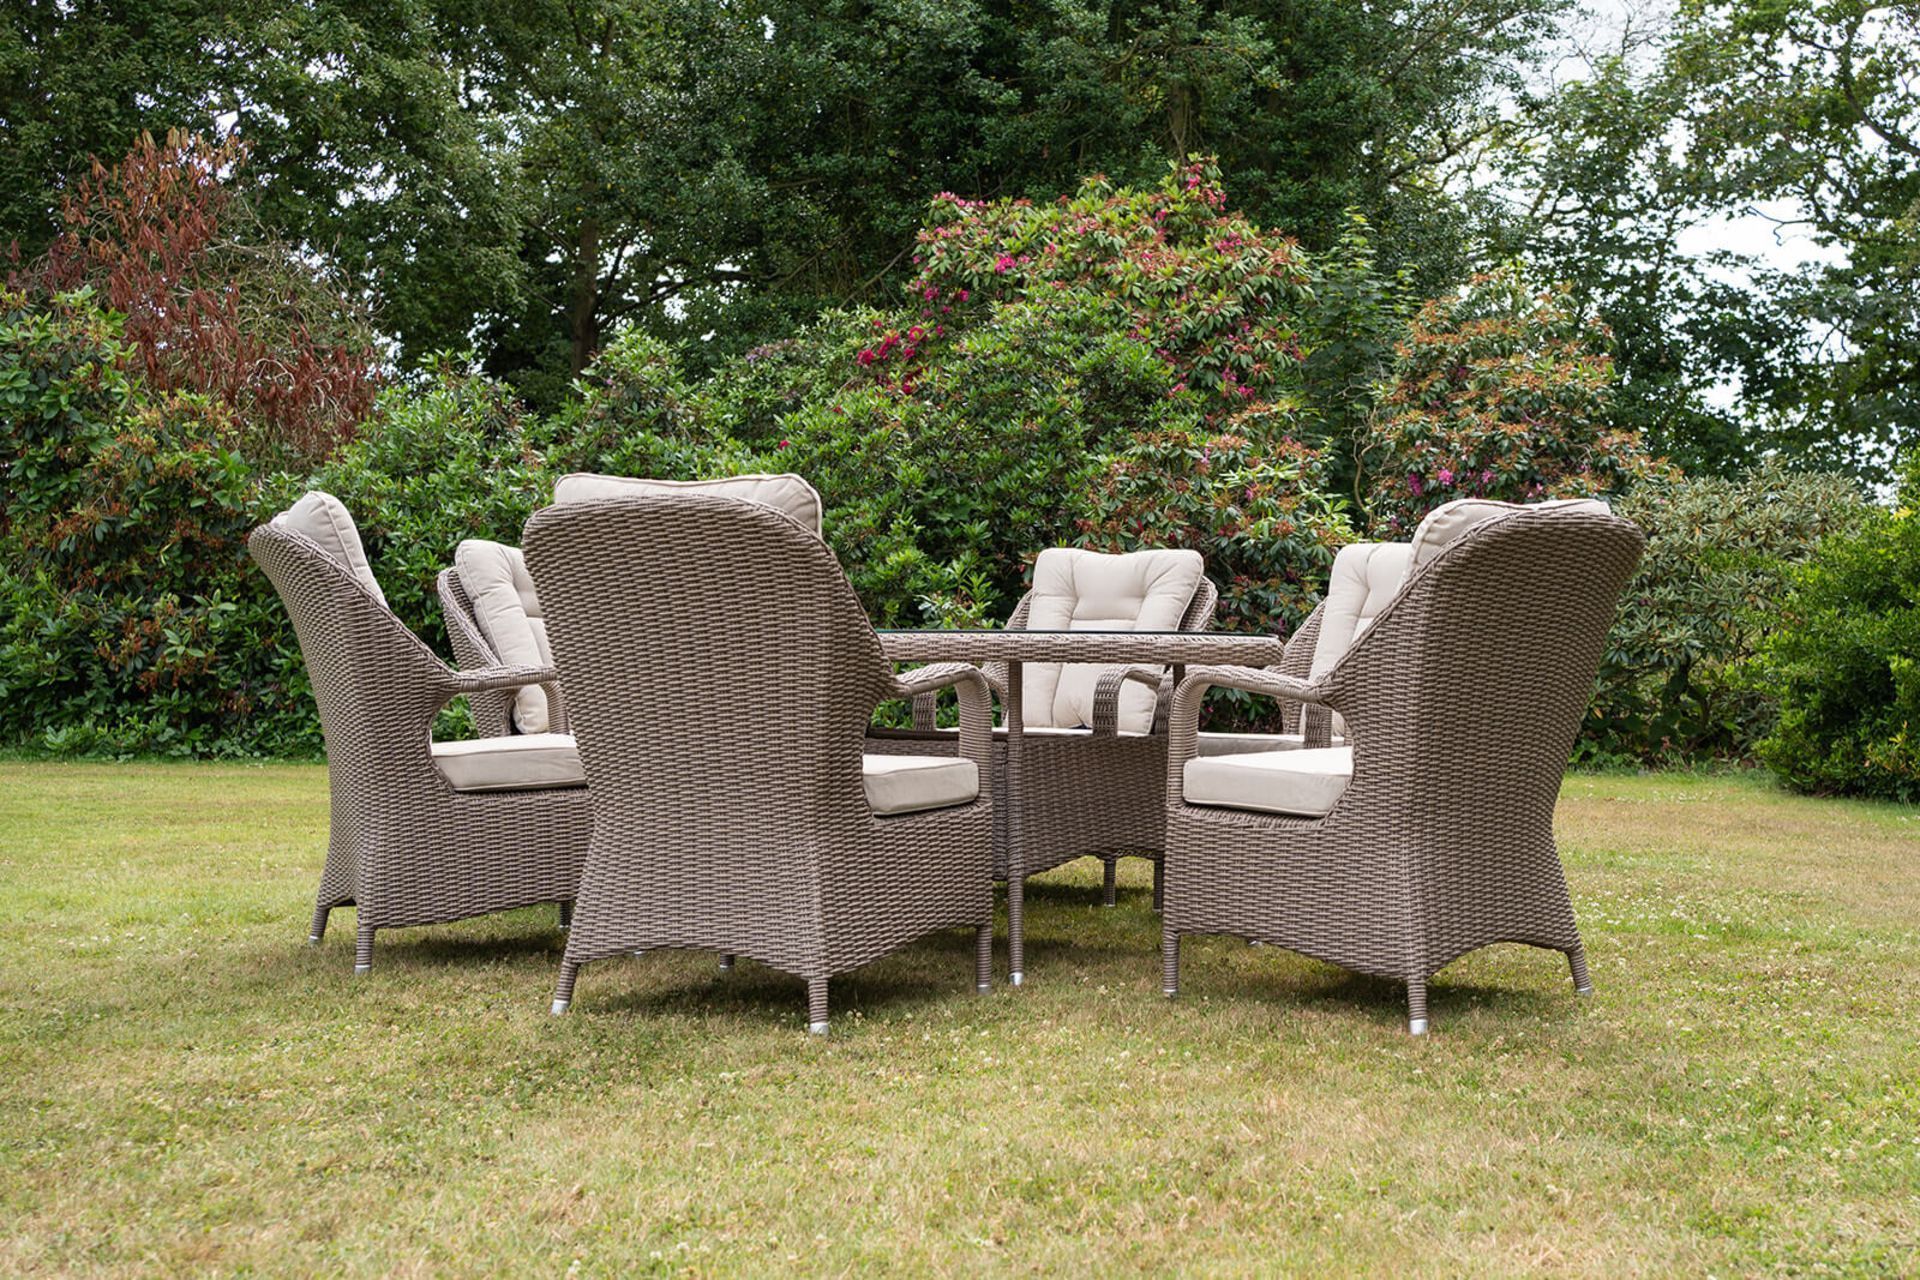 Brand New Moda Furniture 6 Seater Oval Outdoor Dining Set in Natural With Cream Cushions. RRP £ - Image 3 of 5